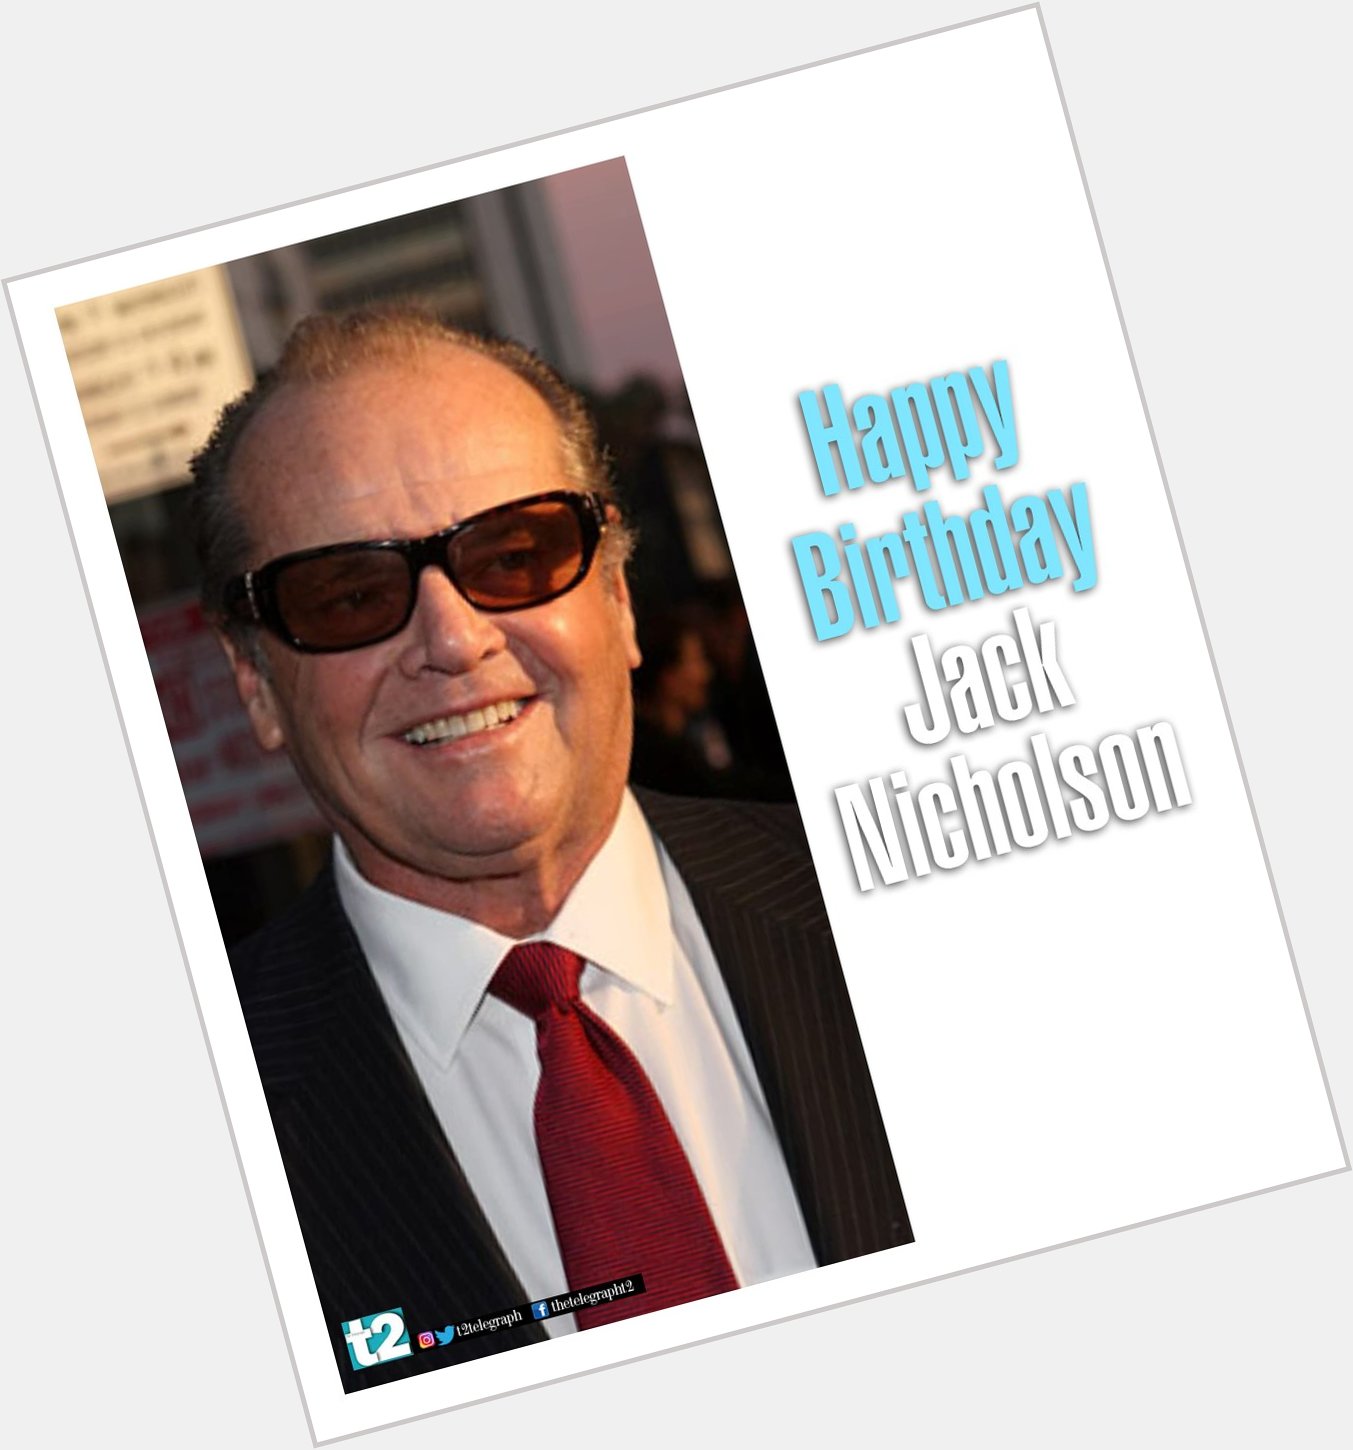 Happy birthday Jack Nicholson. You always make going to the movies a rich experience. 